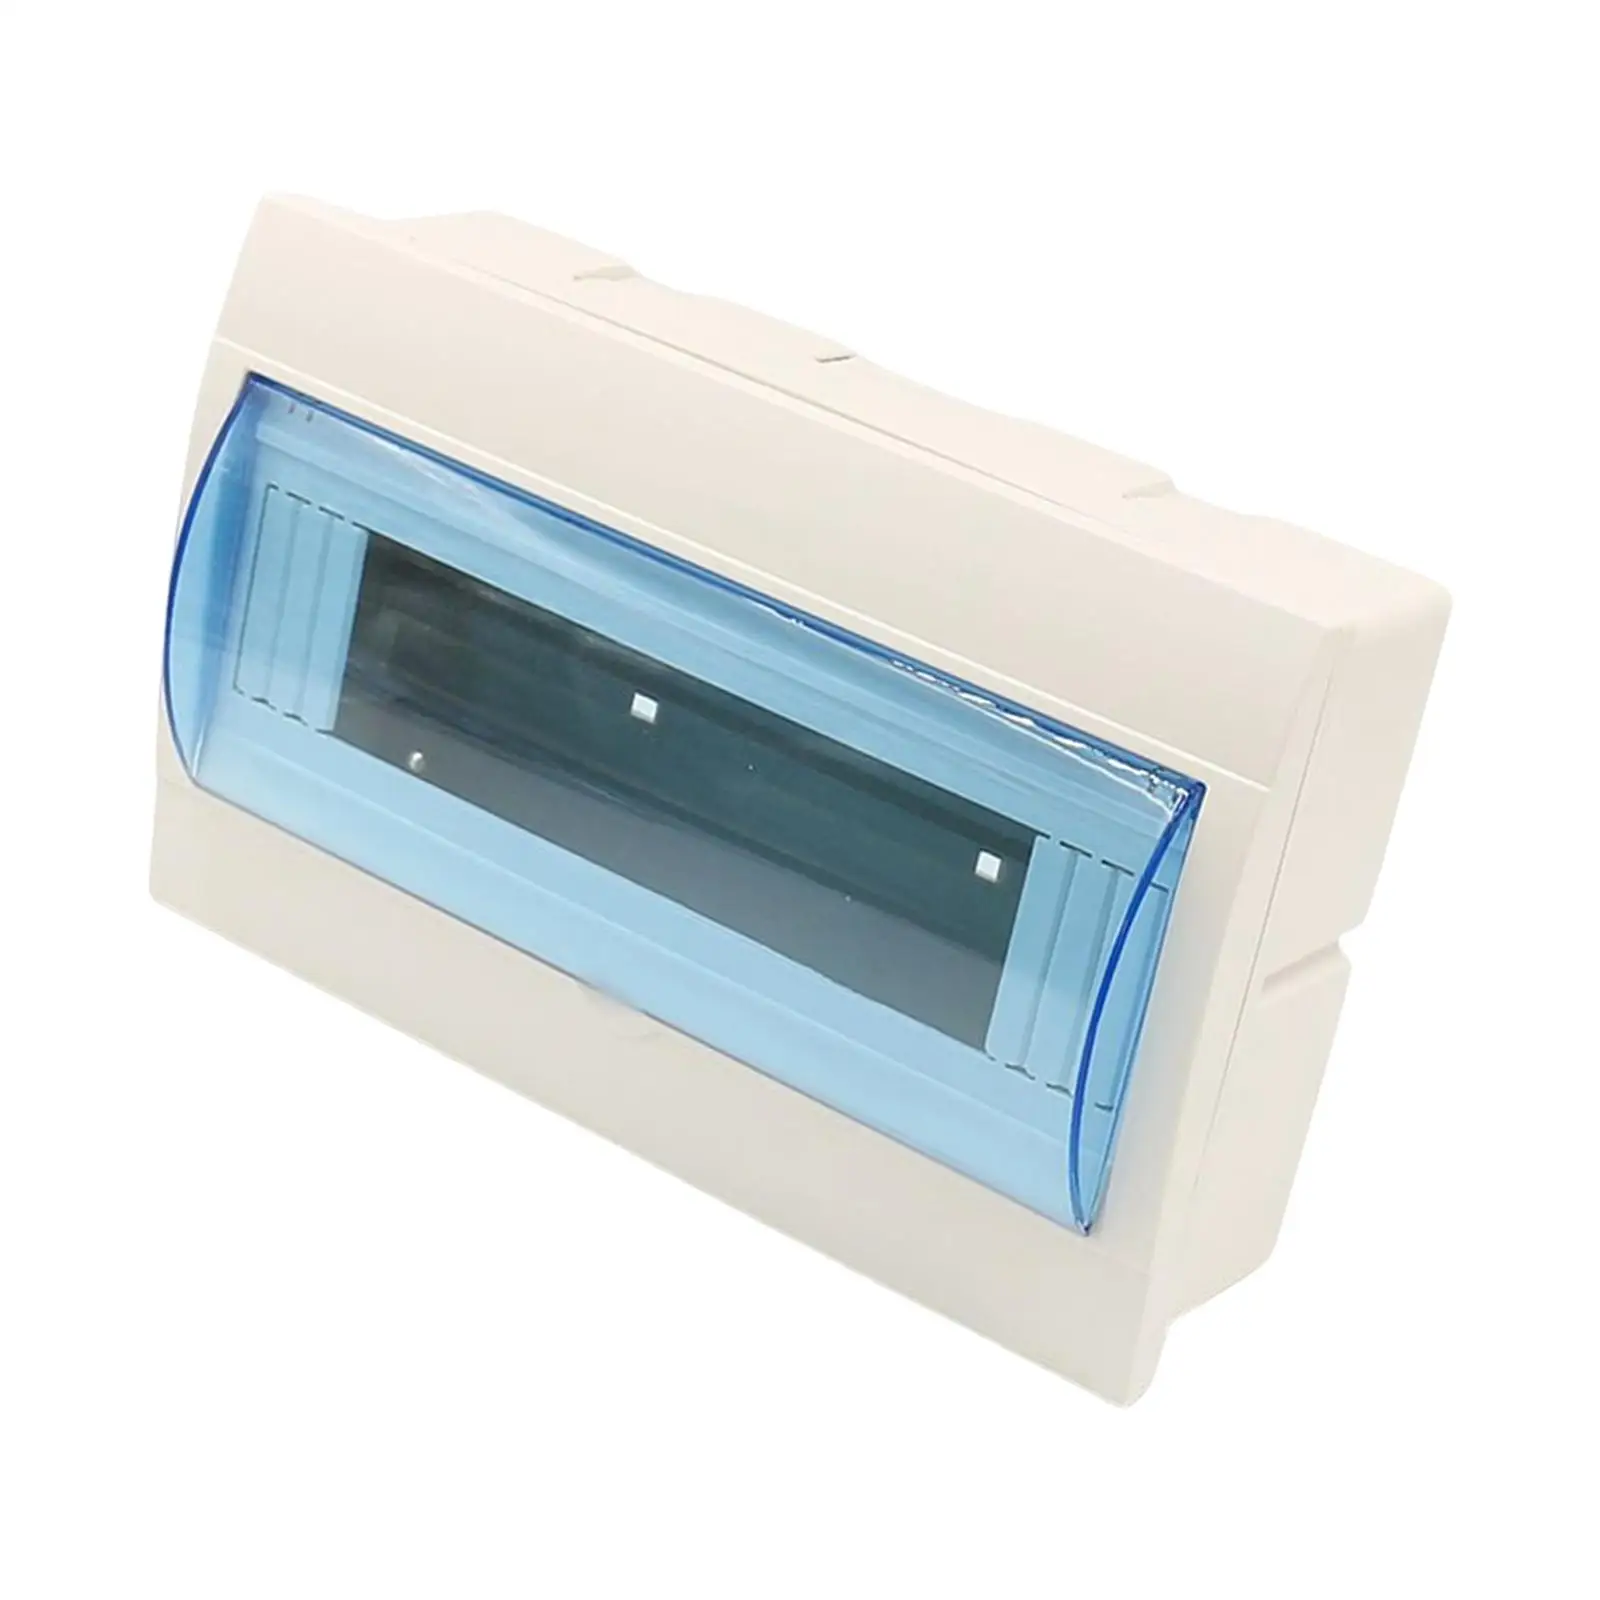 Waterproof Circuit Breaker Box Electrical Panel Cover Power Distribution Box Distribution Box for Indoor Outdoor Electrical